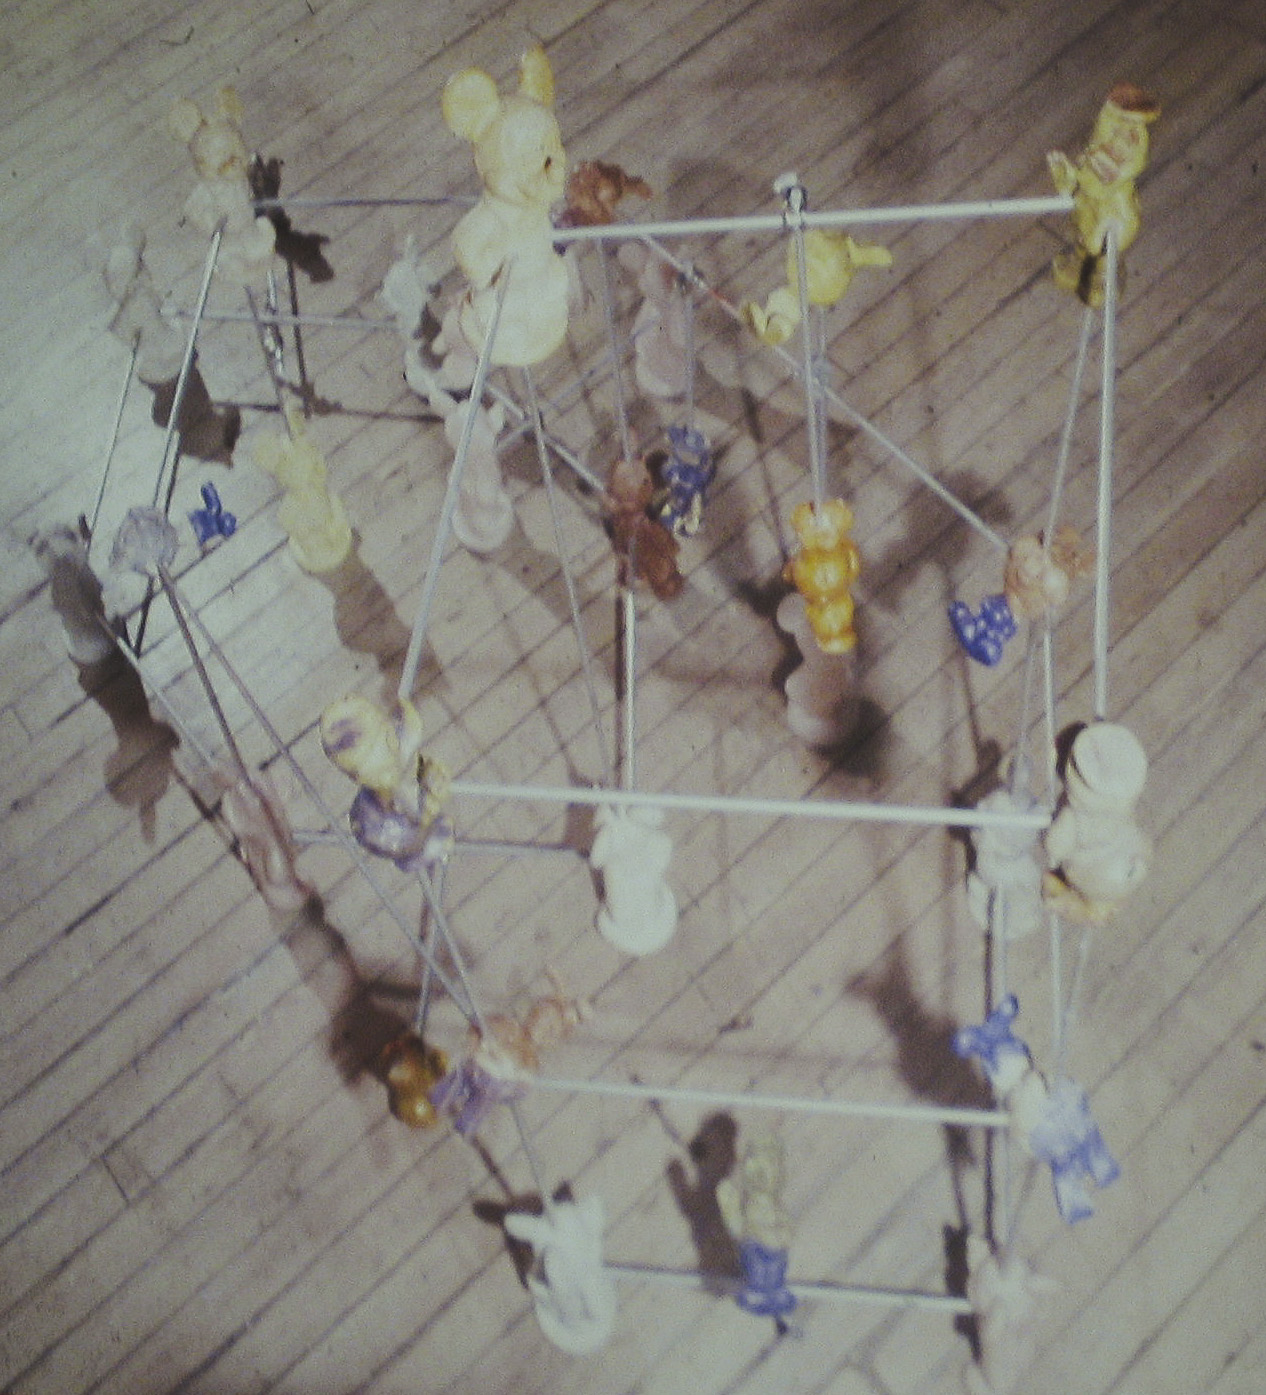 Dennis Oppenheim - Armatures for Projection: The Early Factory Projects. Curated by Raul Zamudio. White Box, 2004 (34)